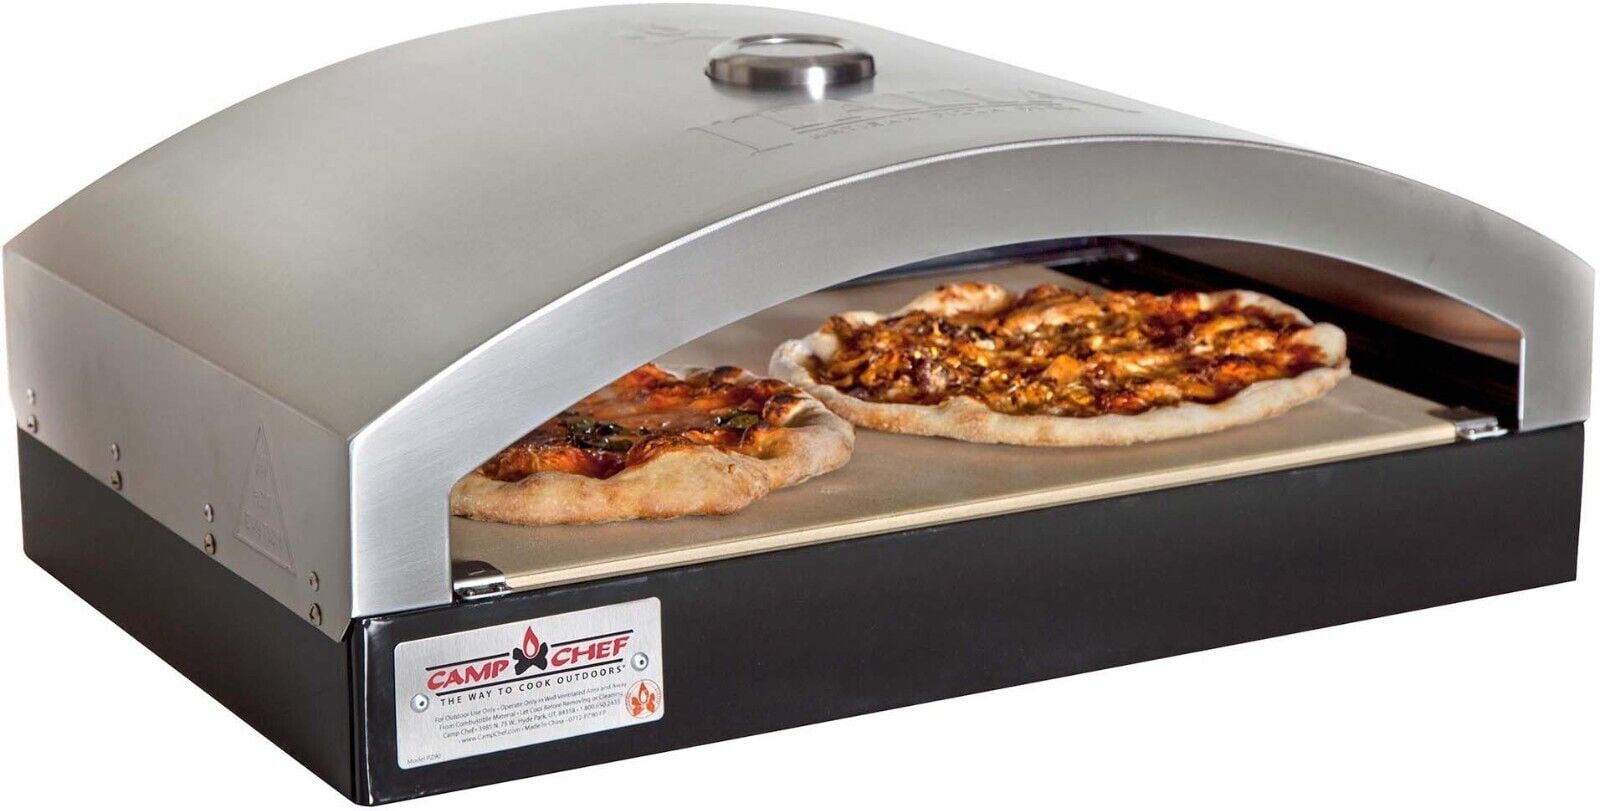 Camp Chef Artisan Pizza Oven 90 